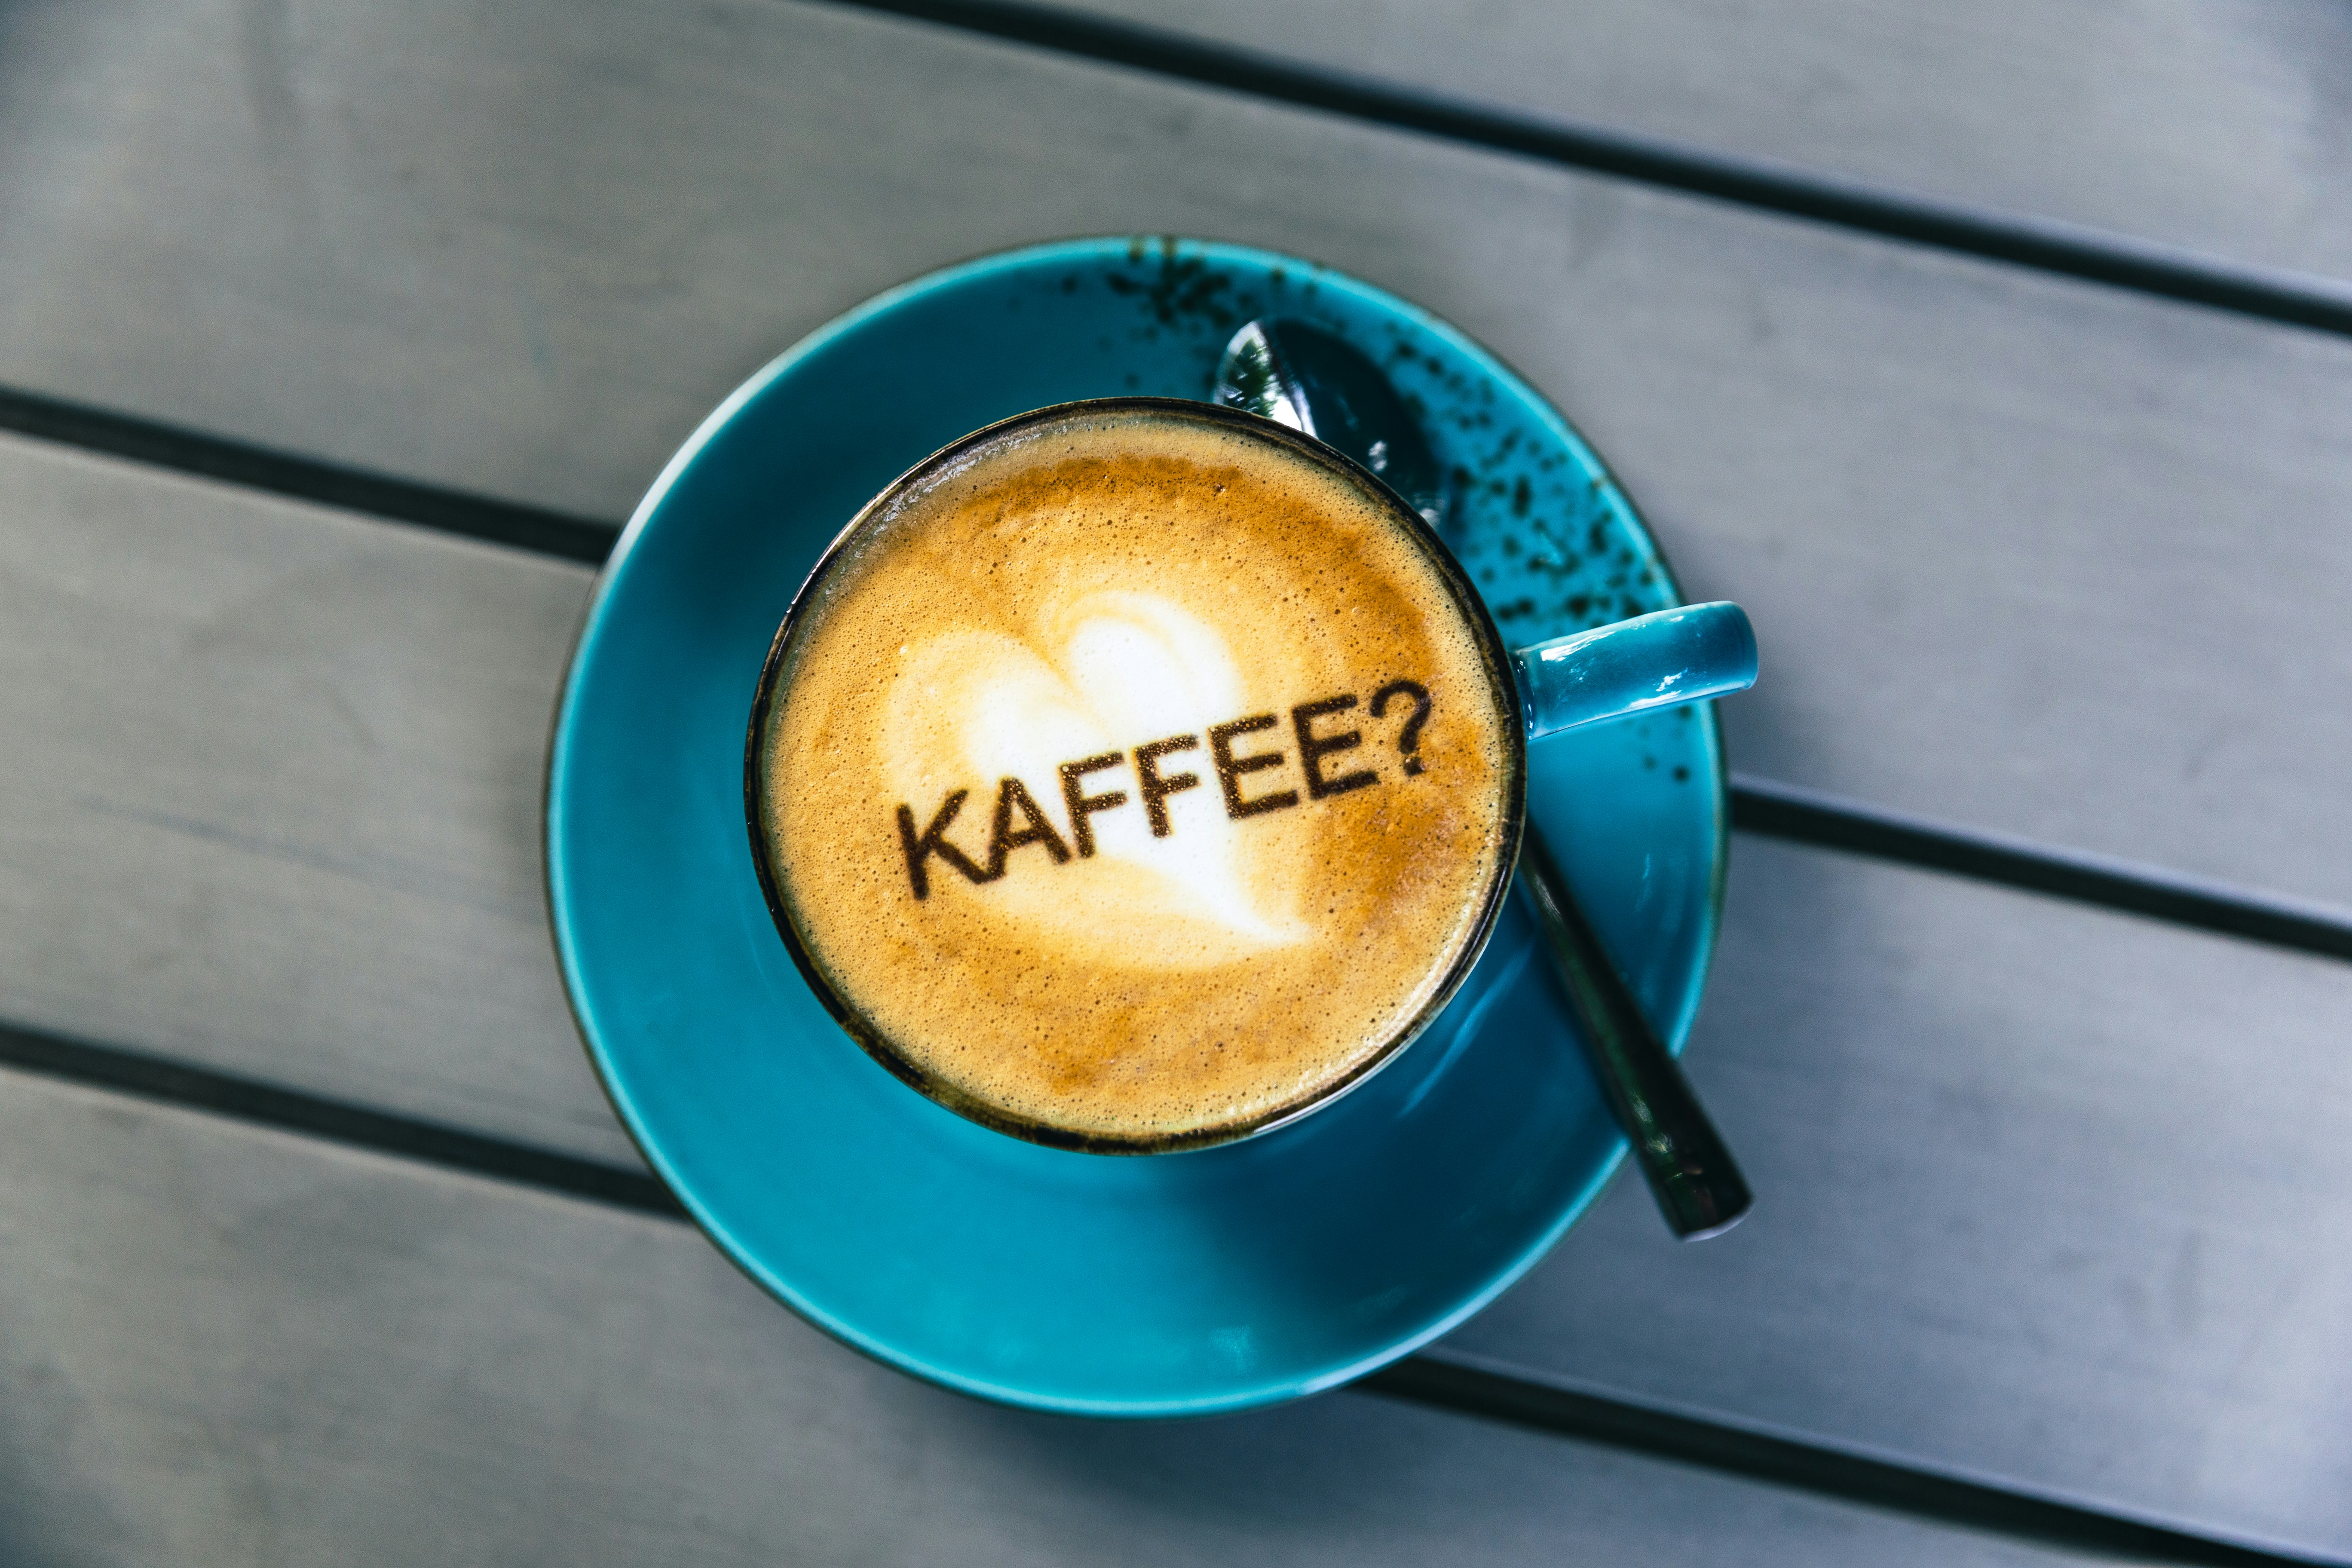 Communication by coffee.

One cup of freshly brewed coffee (cappuccino) on a table, with the following text in GERMAN language on the coffee foam: "KAFFEE?" (English: "Coffee?"). The food coloring was applied to the milk foam by a professional barista coffee printer.